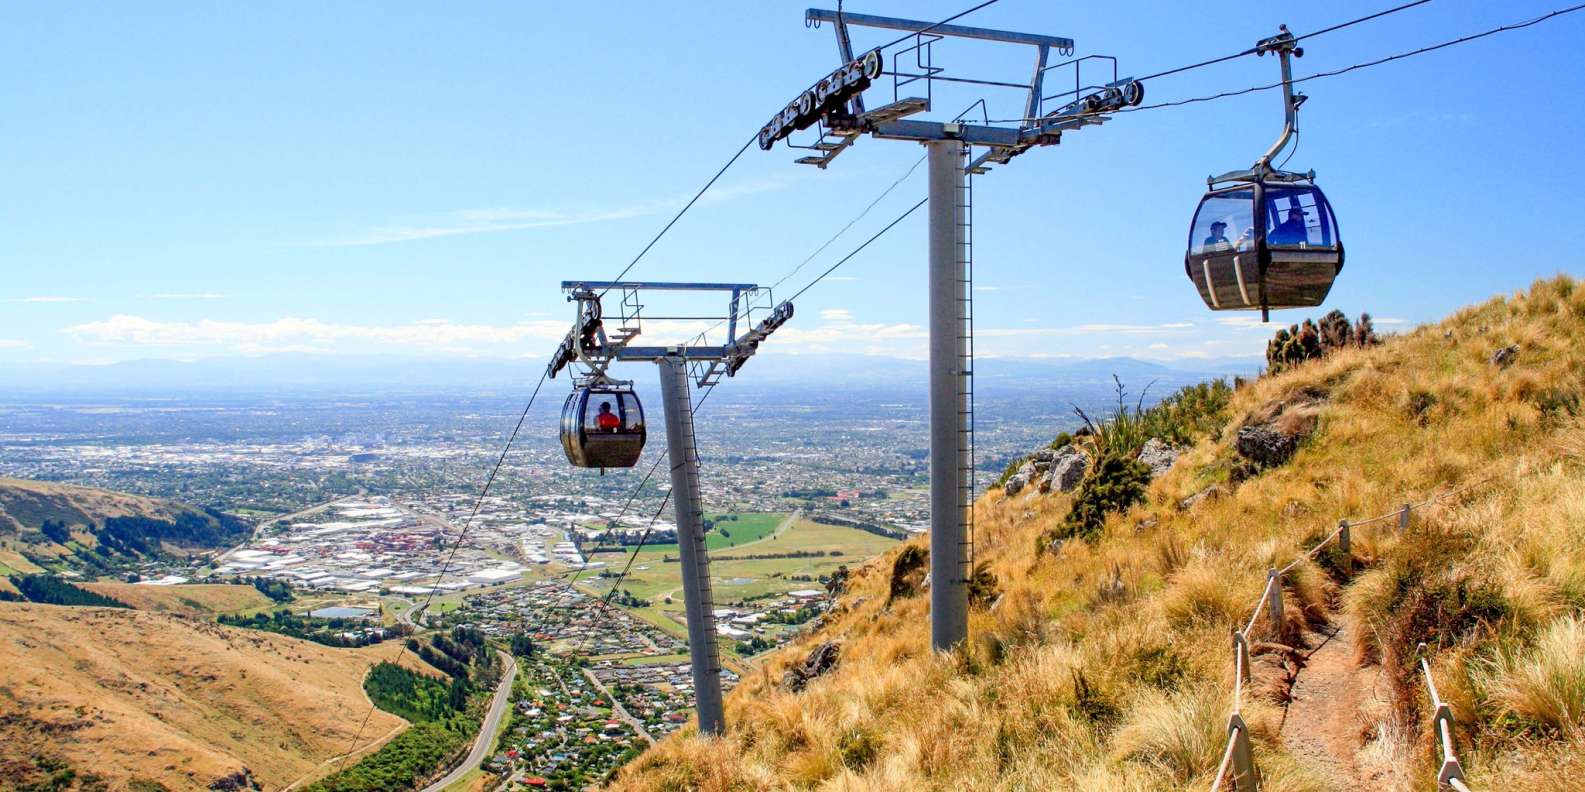 The BEST Christchurch Nature & adventure 2023 FREE Cancellation GetYourGuide